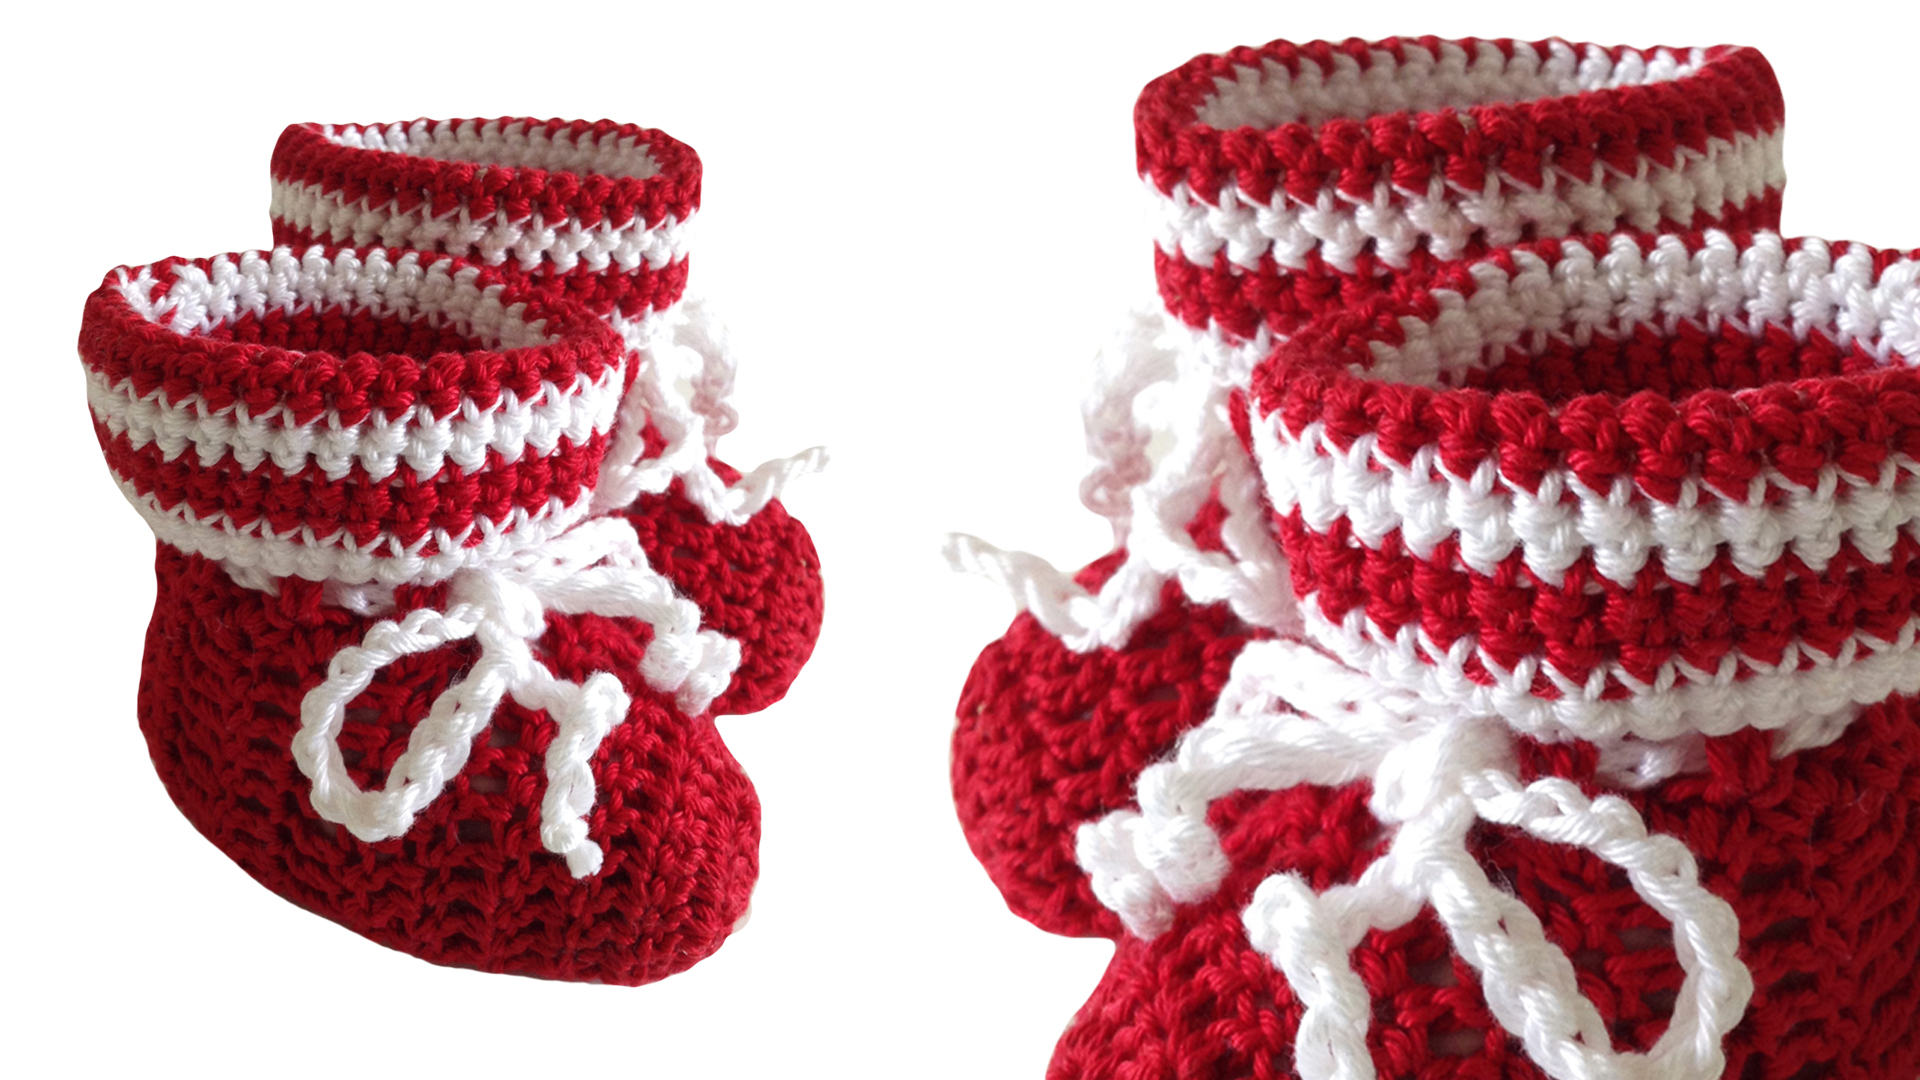 maggies-crochet-red-and-white-booties-free-pattern-close-up